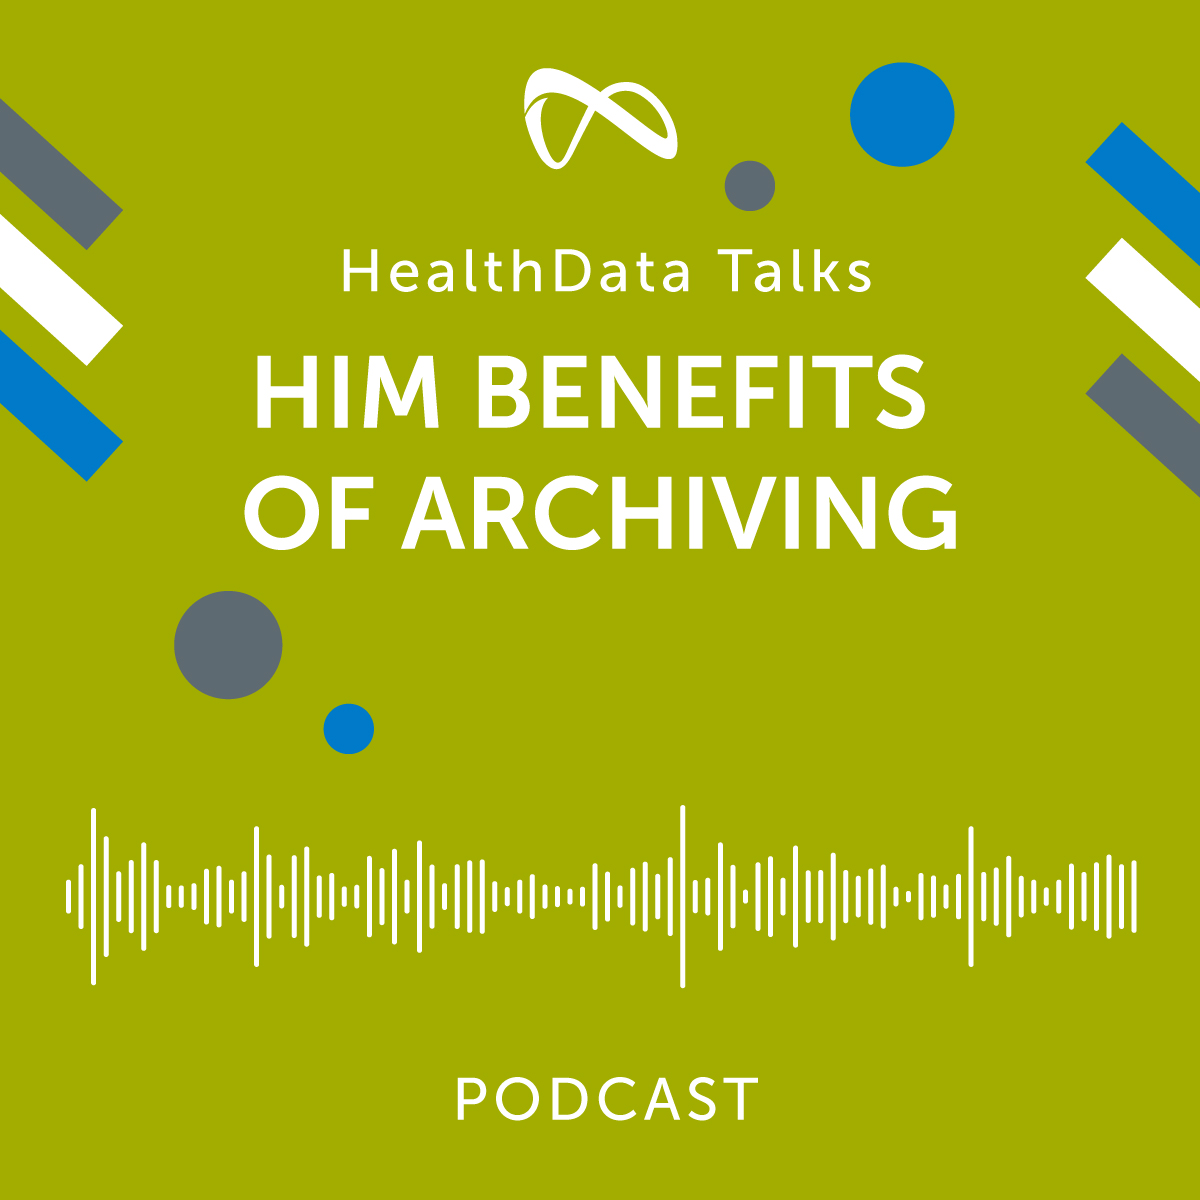 HIM Benefits of Archiving